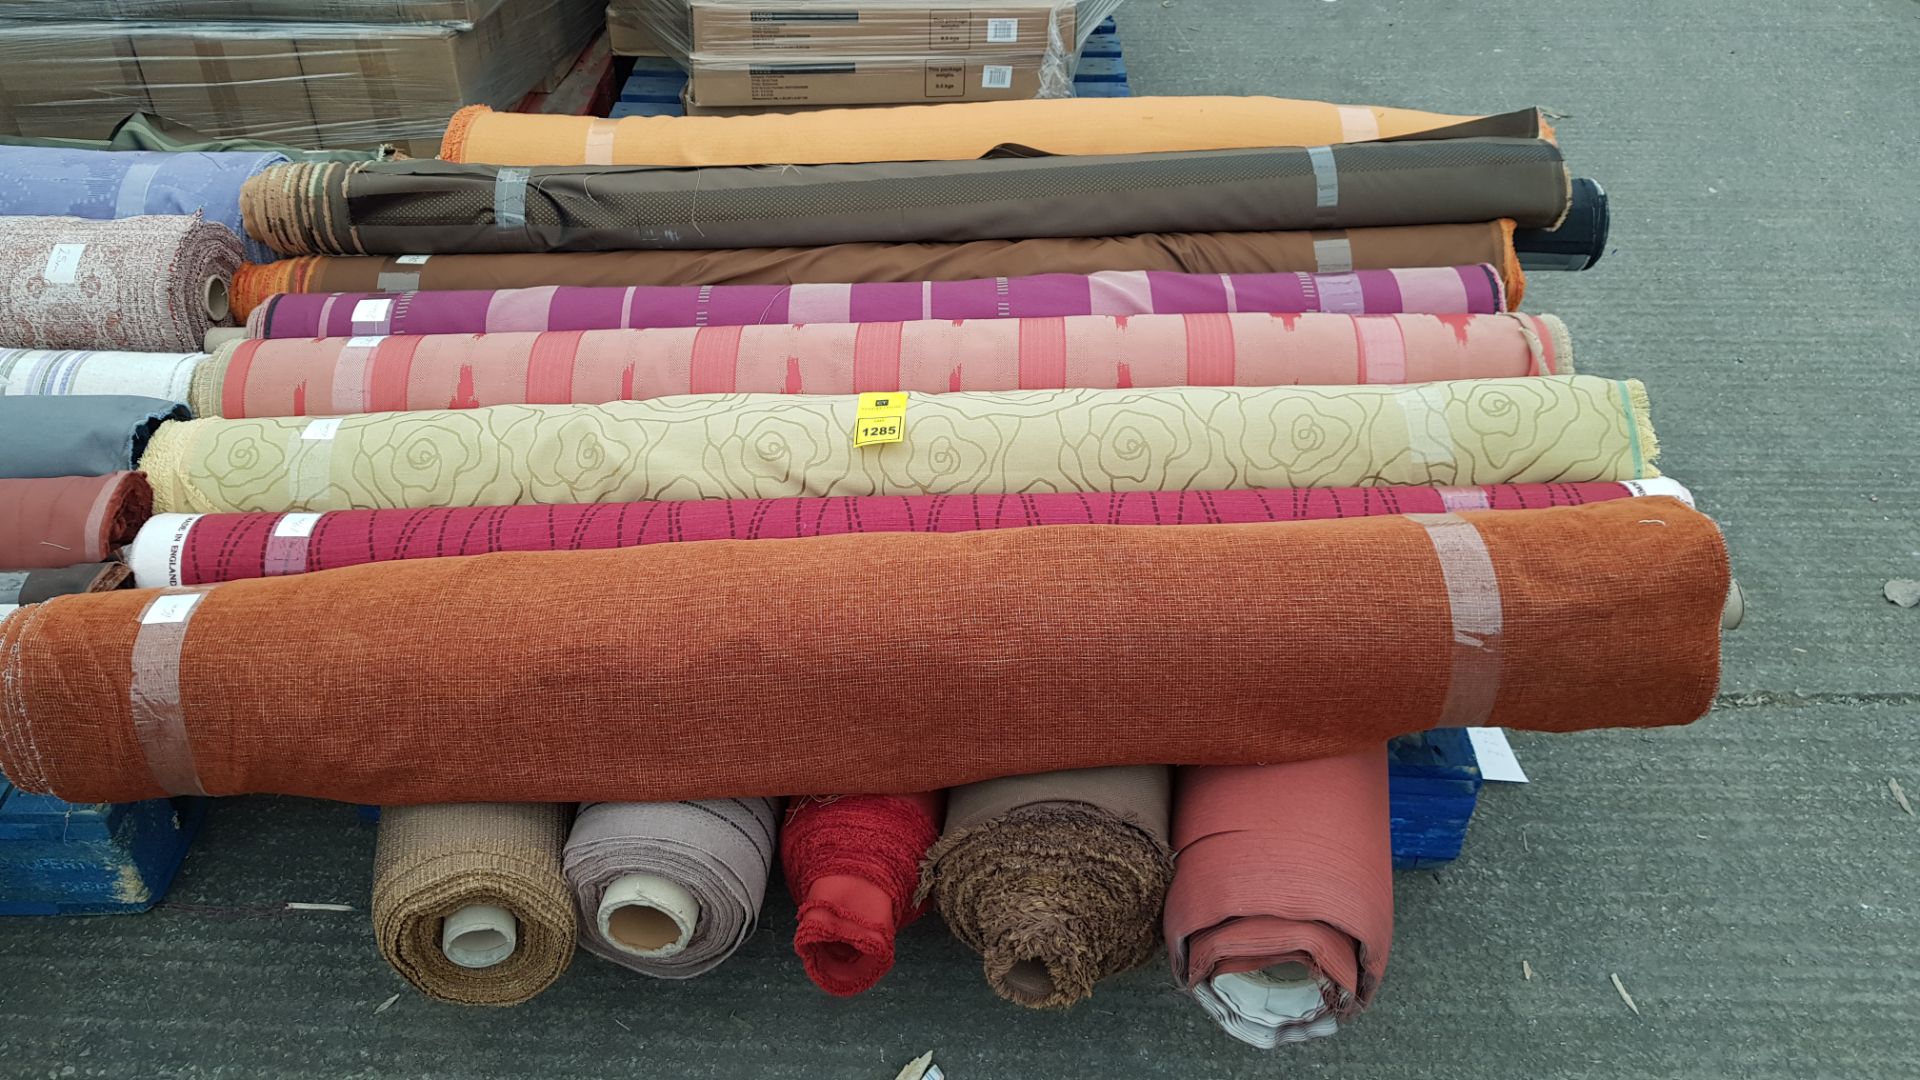 14 X ROLLS OF QUALITY FABRIC IN VARIOUS COLOURS AND DESIGNS TOTAL YARDAGE - 360 YARDS (SEE SECOND